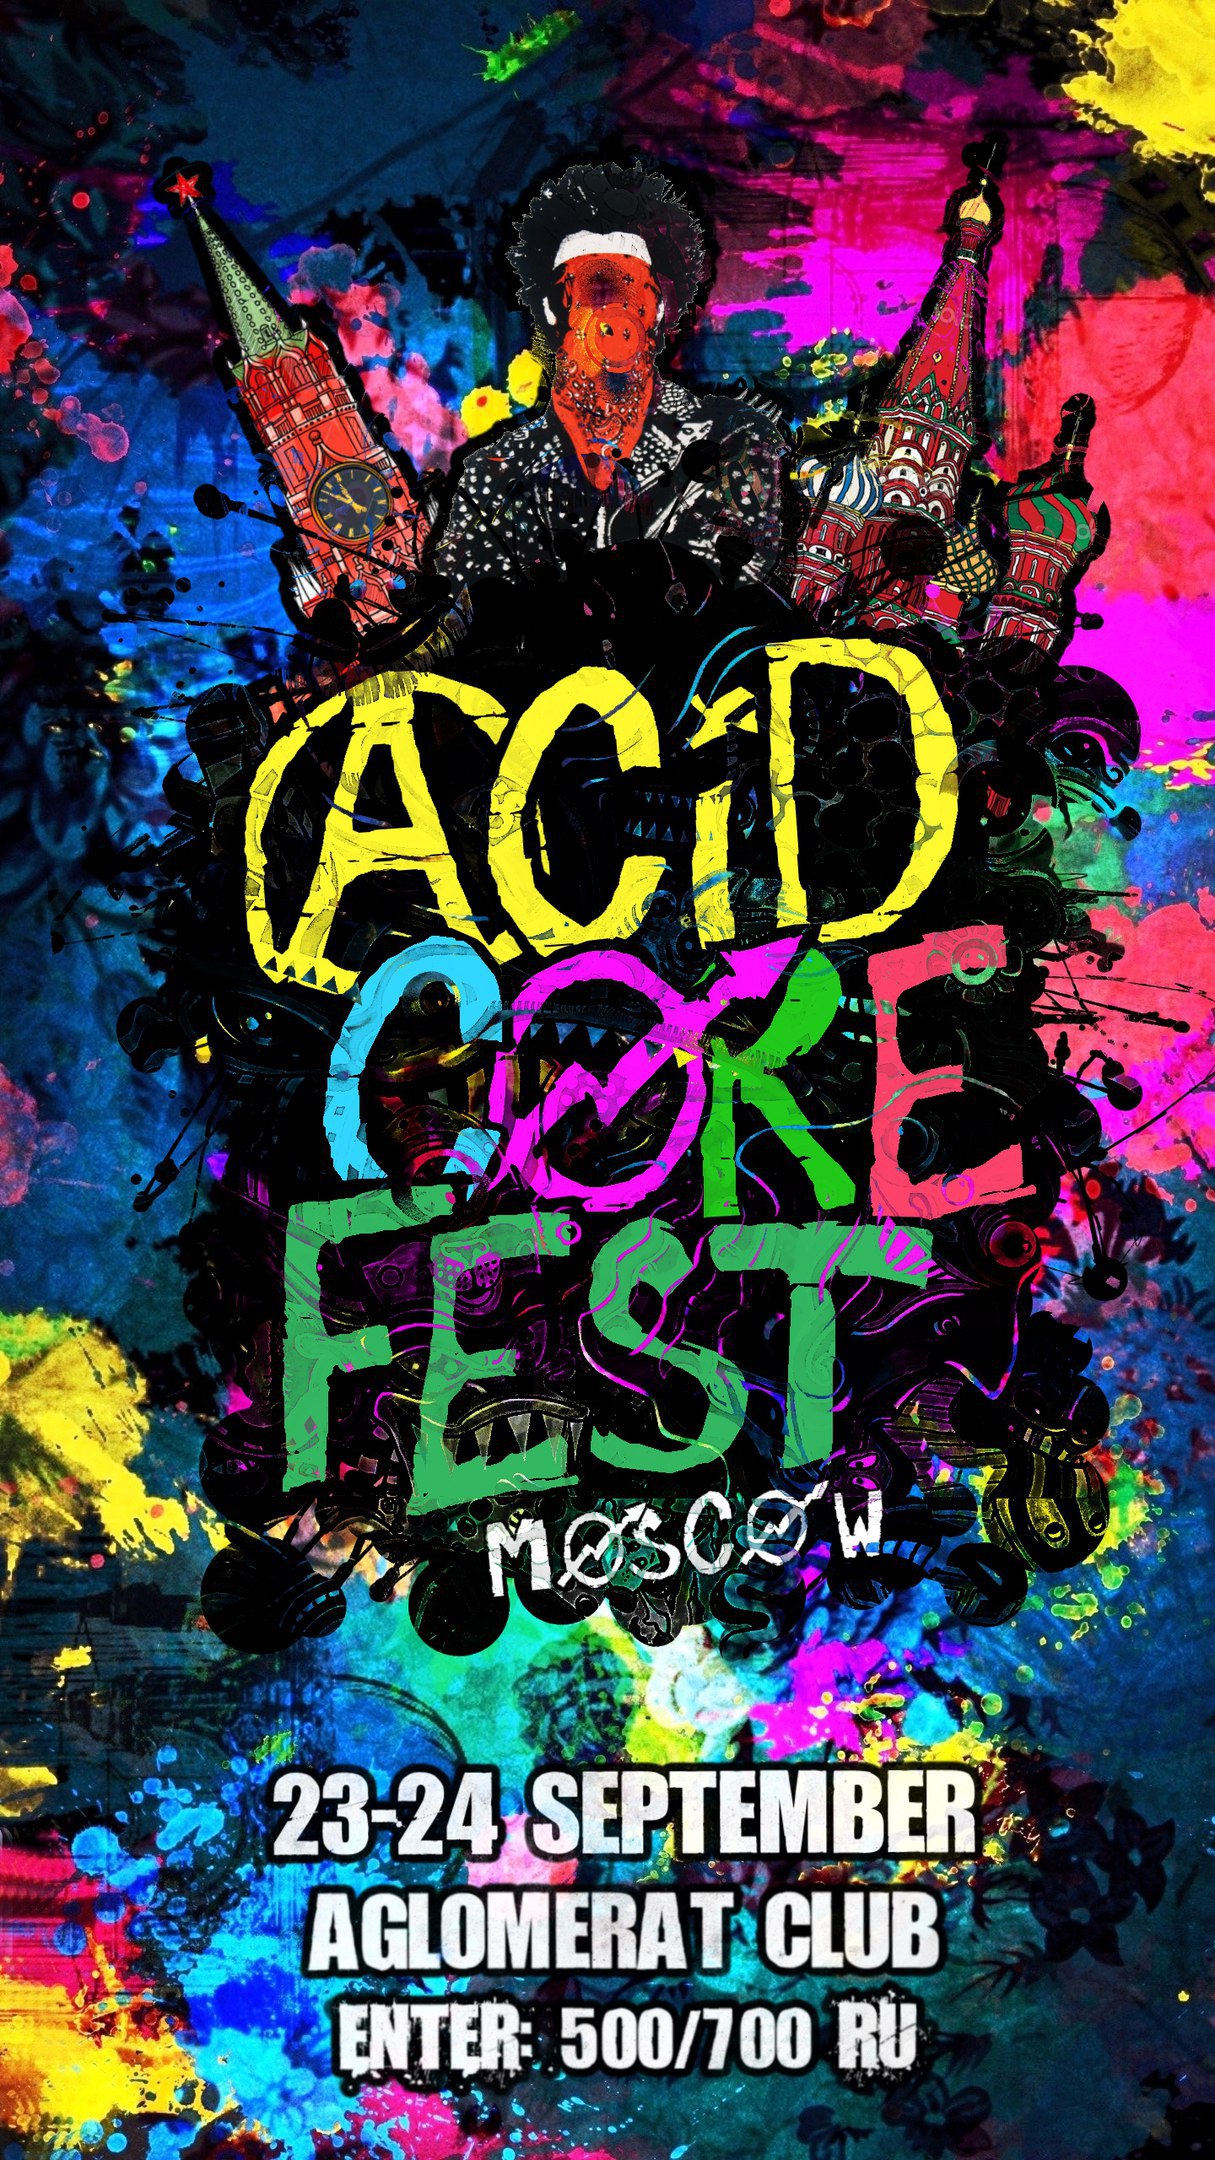 24.09.2016 Acidcorefest.moscowedition @ Anglomerat Club, Moscow (RU)